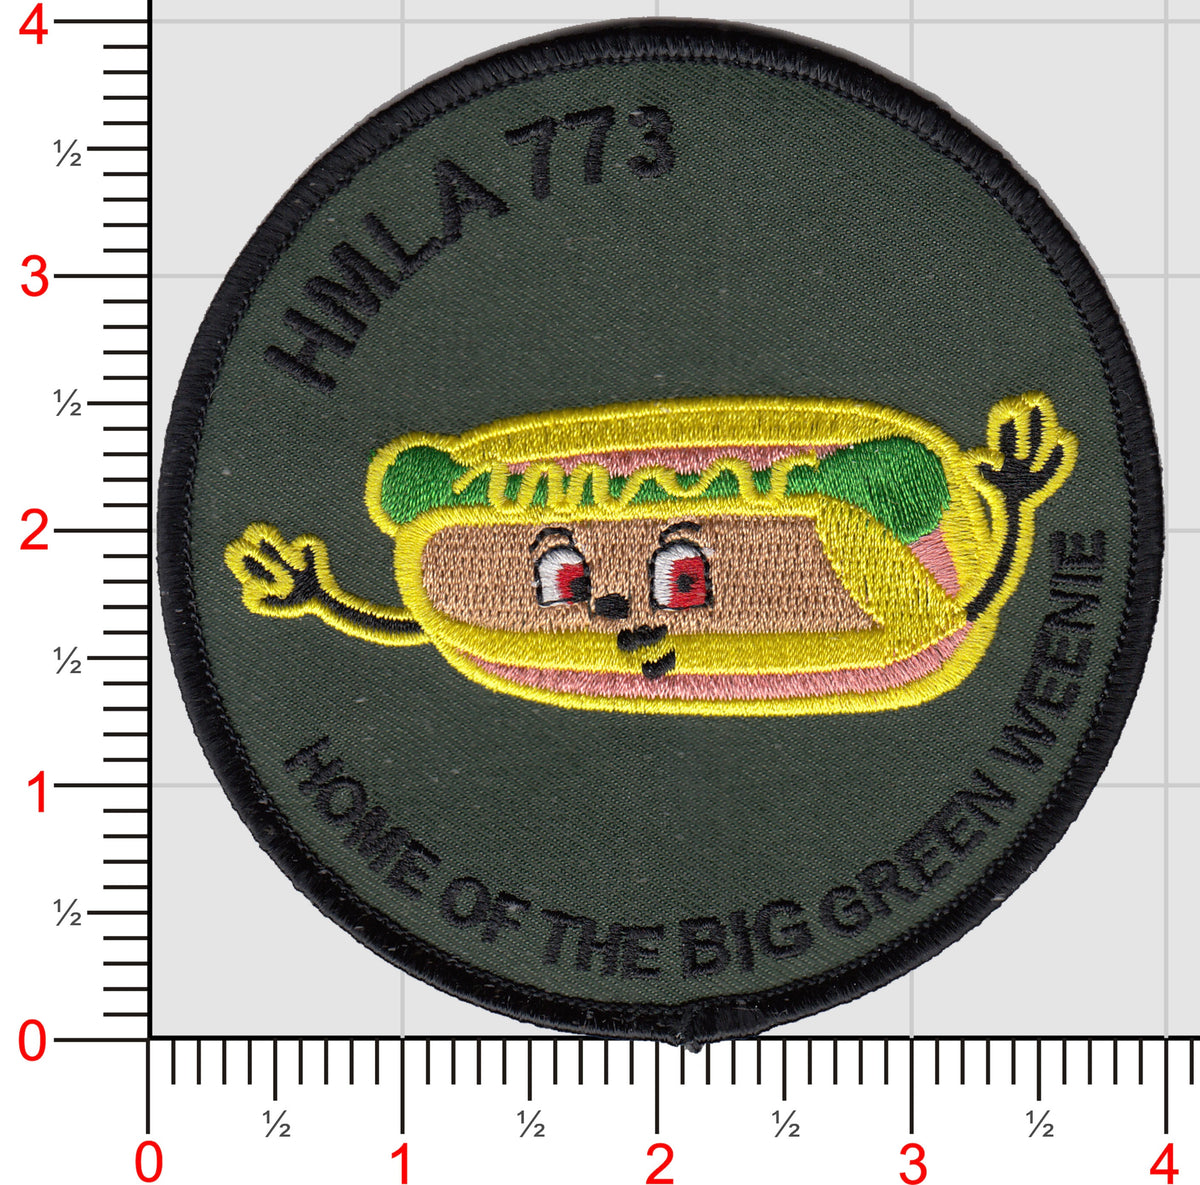 Official HMLA-773 Det A Mardi Gras Patches – MarinePatches.com